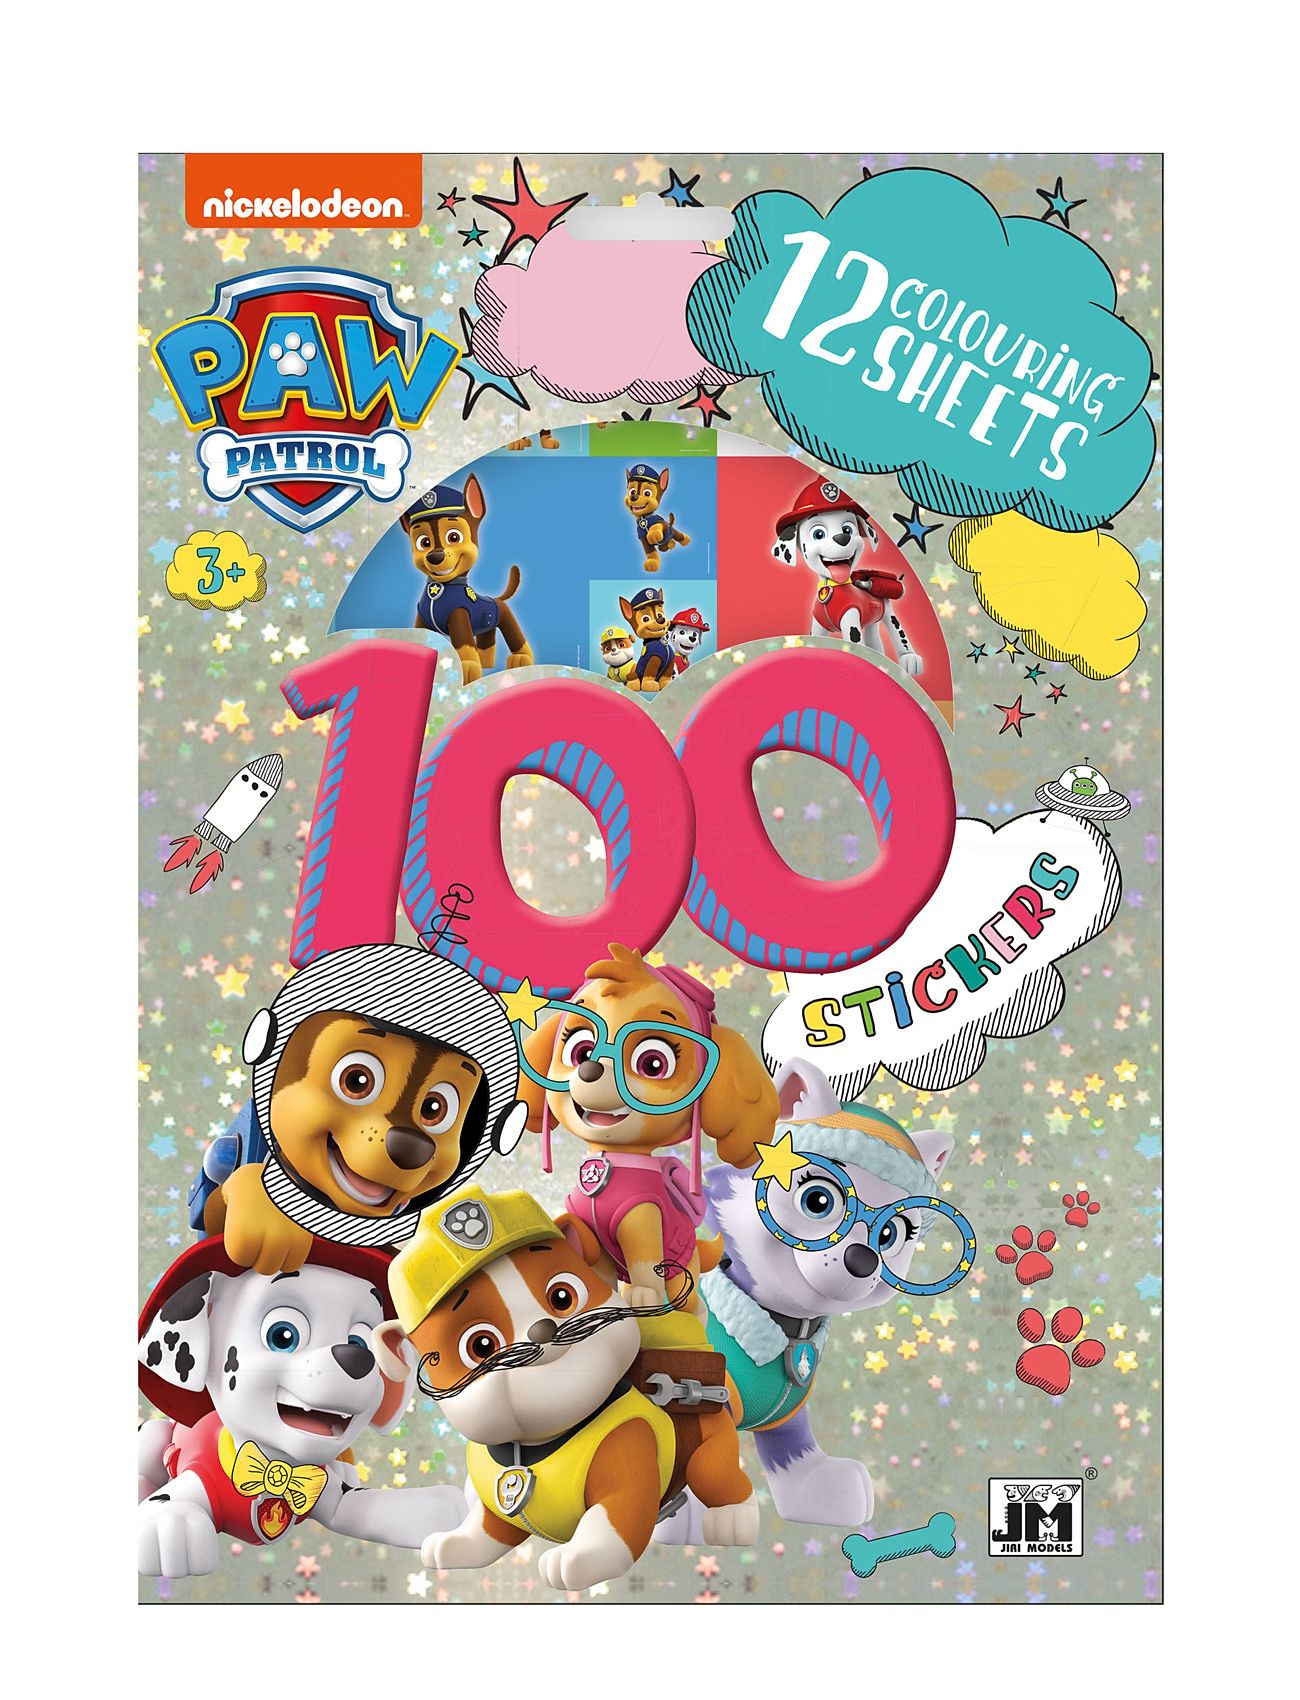 Paw Patrol 100 Stickers Toys Creativity Drawing & Crafts Craft Stickers Multi/patterned Sense